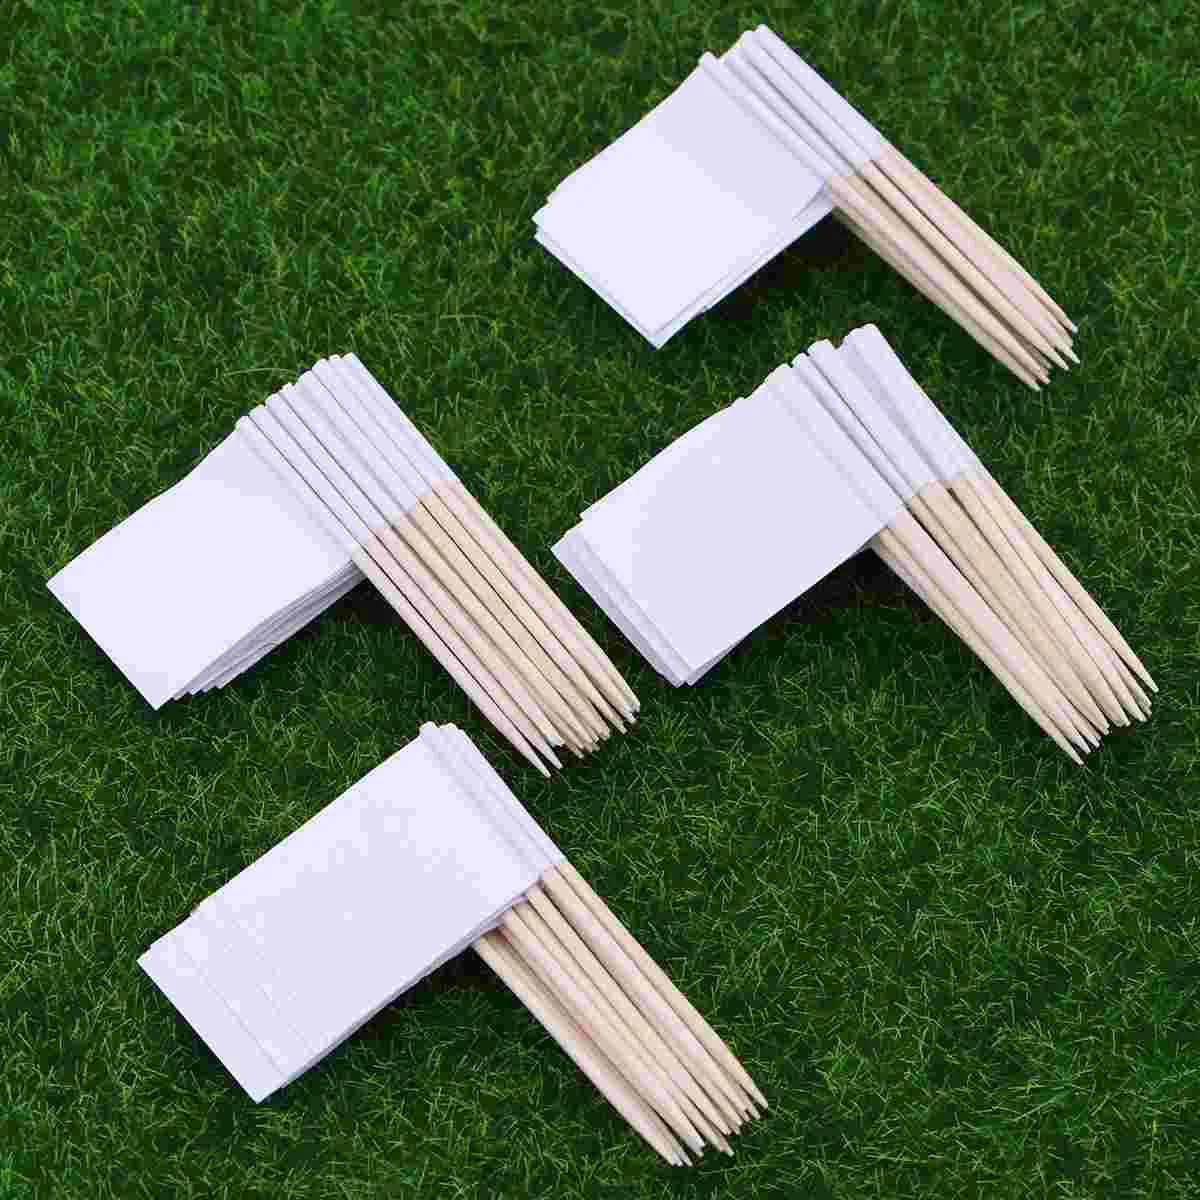 

Flag Picks Flags Cupcake Blank Toothpicks White Sticktoothpick Topper Country Picksmall Toppersappetizer Wood Sticks Fruit Party